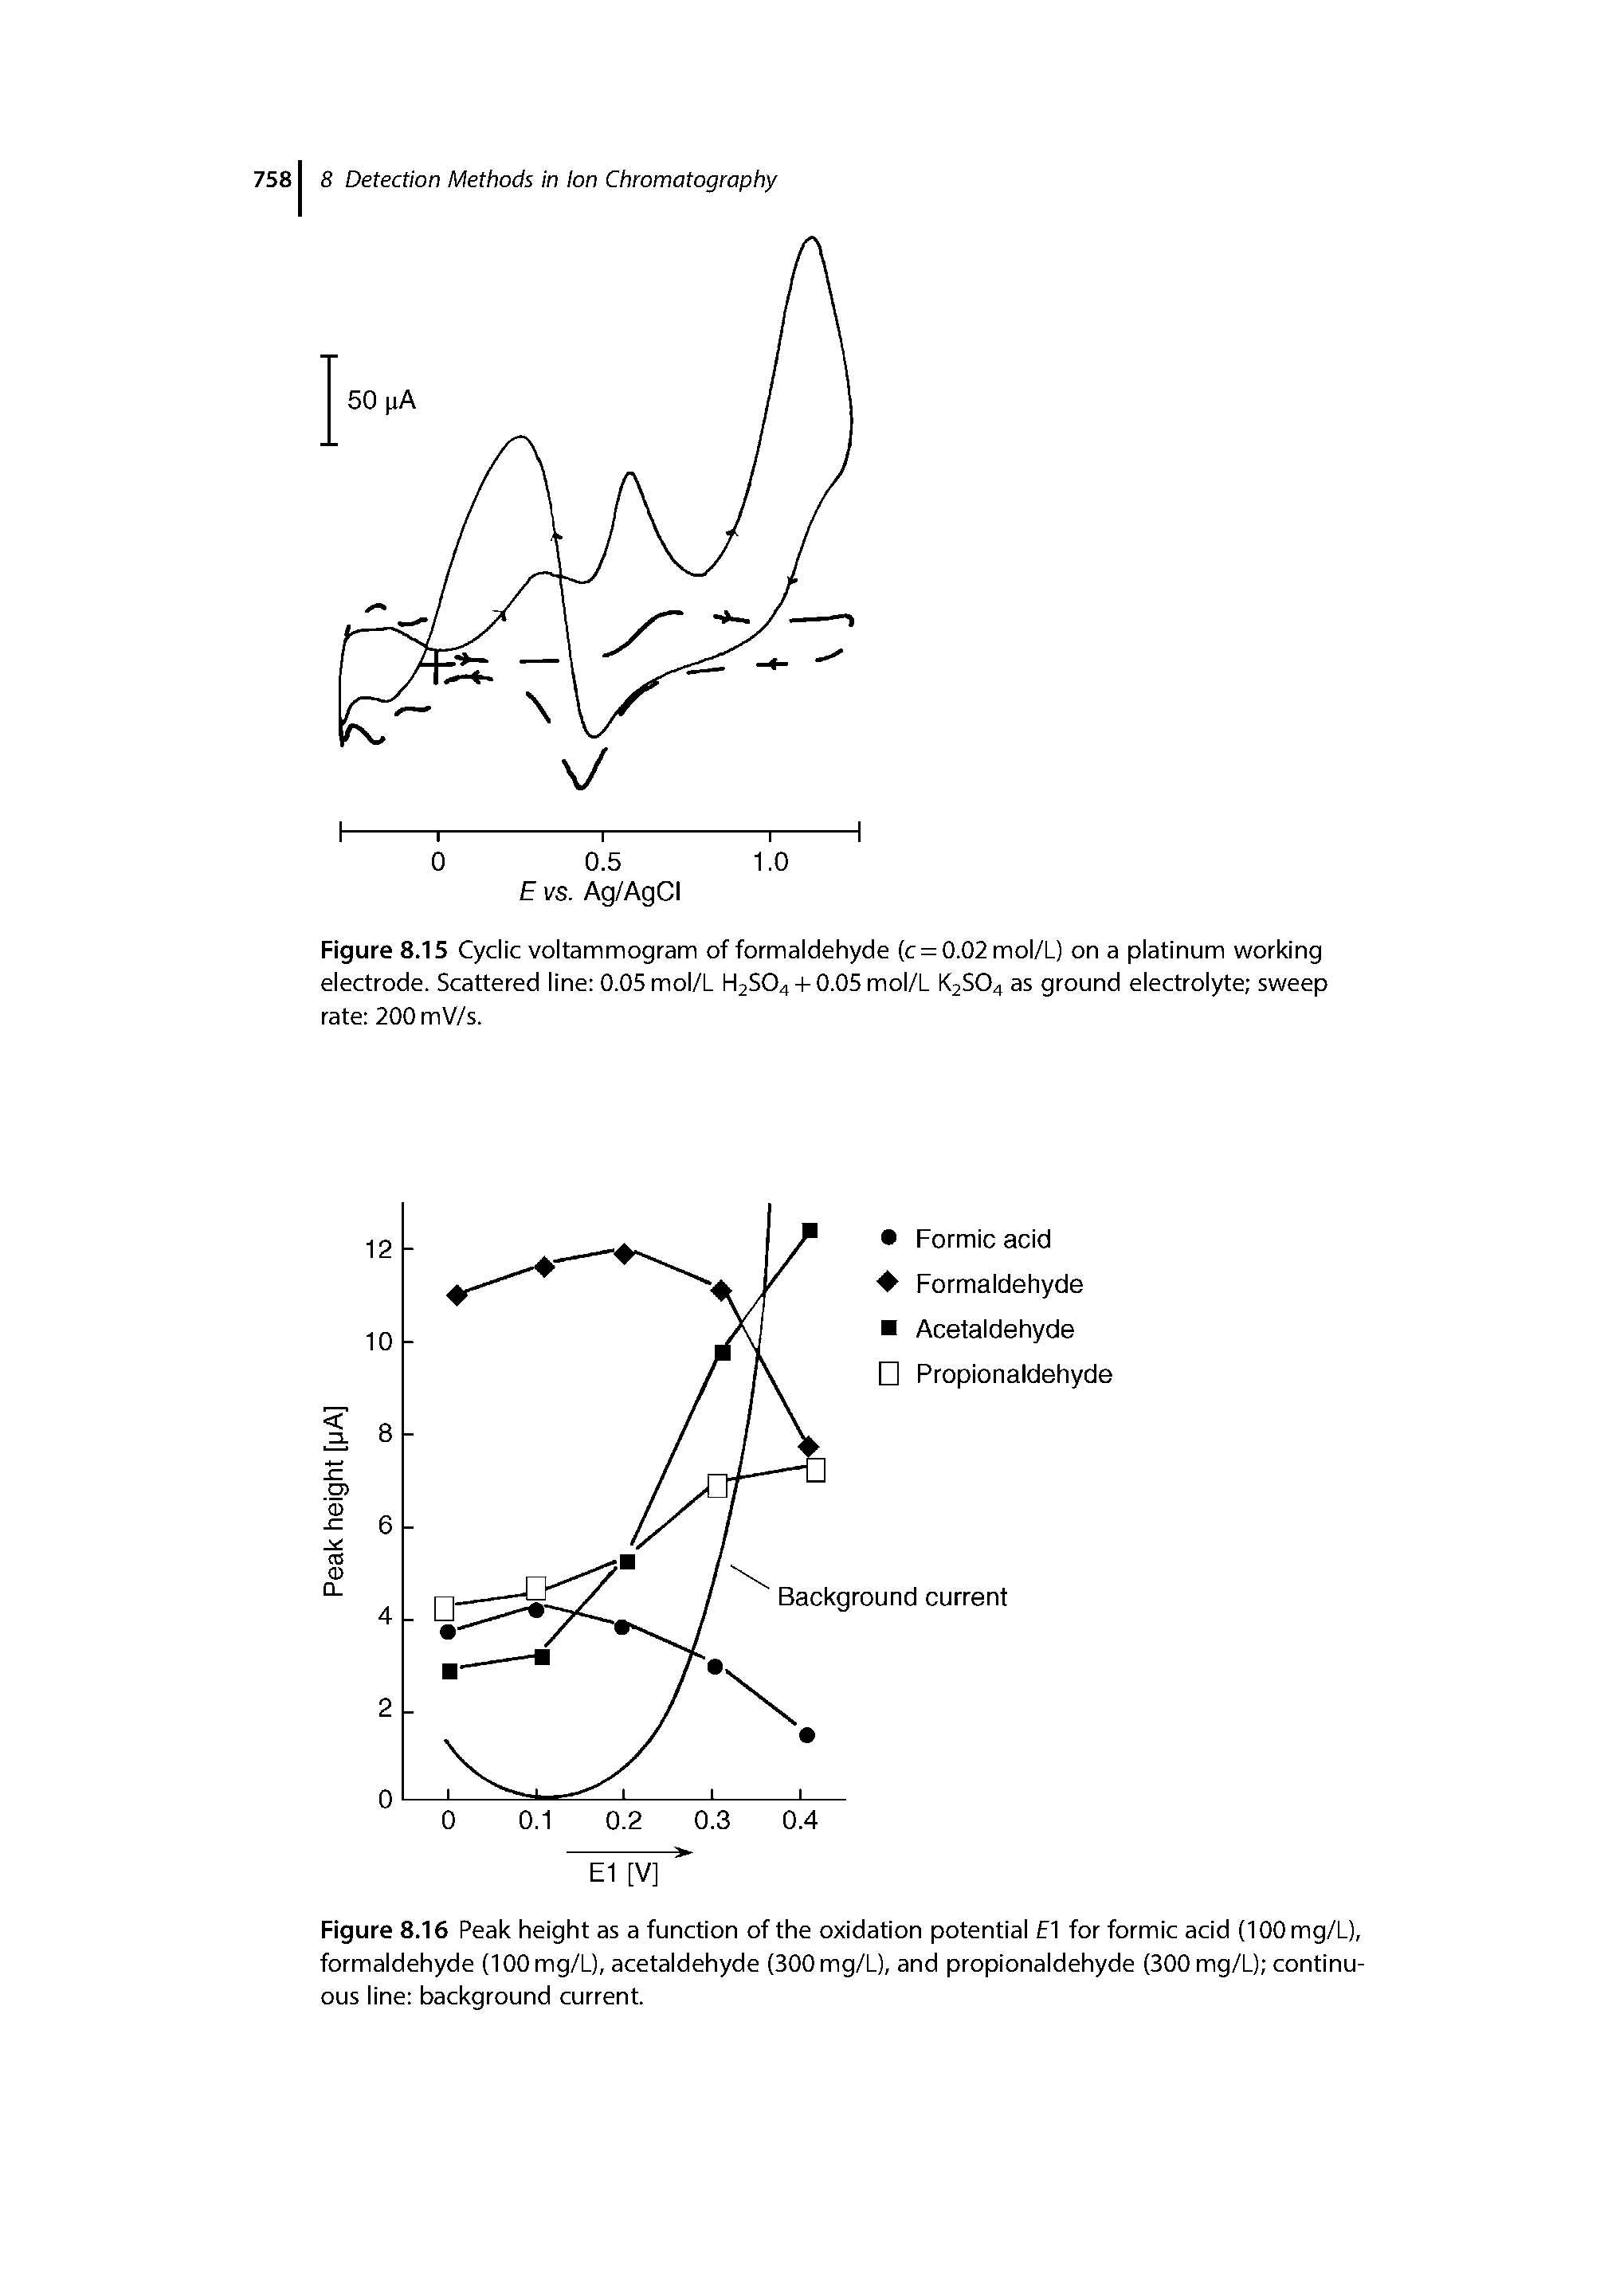 Figure 8.16 Peak height as a function of the oxidation potential FI for formic acid (lOOmg/L), formaldehyde (100 mg/L), acetaldehyde (300 mg/L), and propionaldehyde (300 mg/L) continuous line background current.